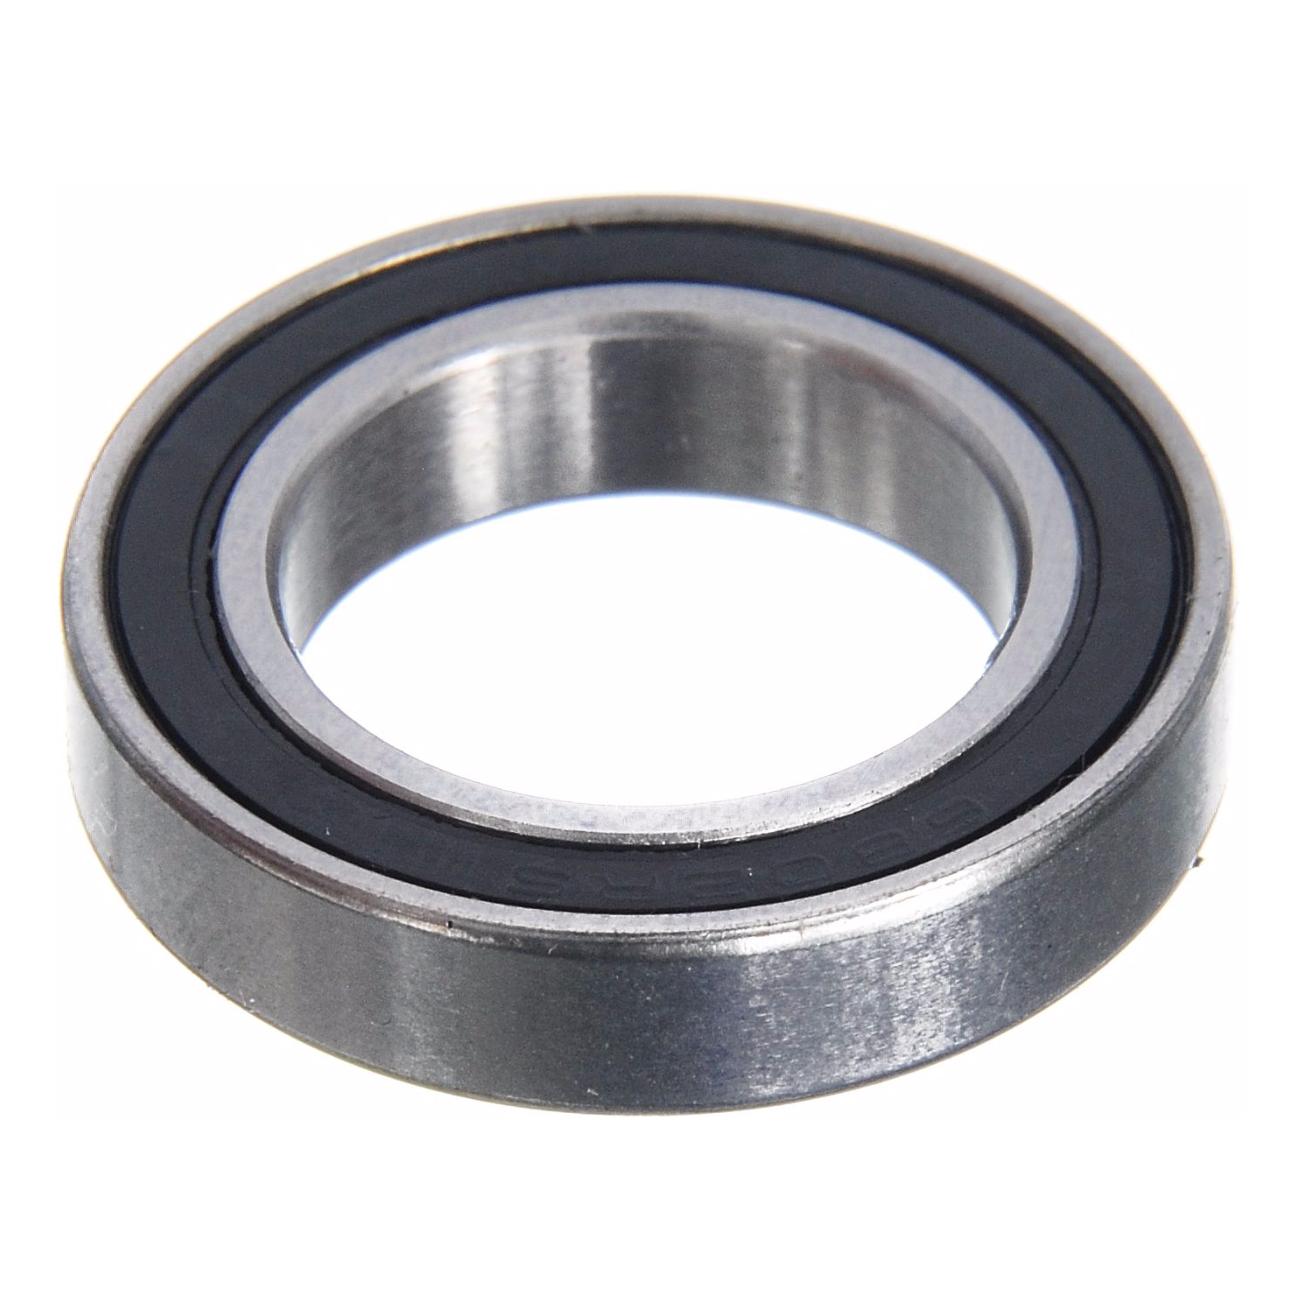 Brand-x Sealed Bearing (6802 2rs)  Silver